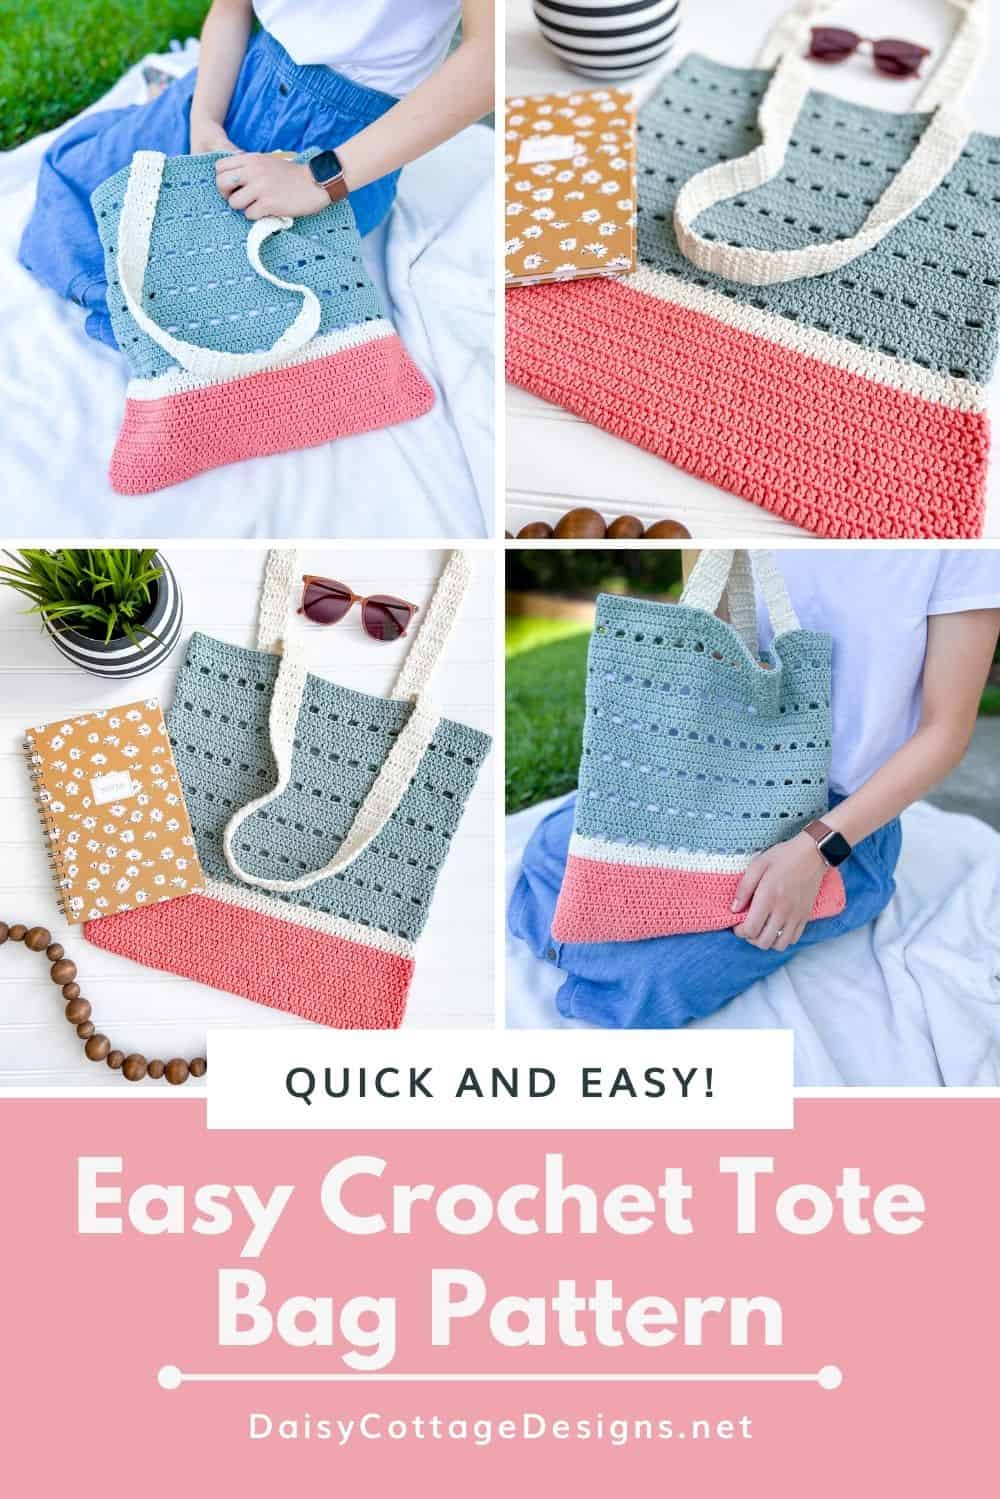 Are you looking for an easy crochet tote bag pattern that’s simple to make and great for beginners? Look no further! This pattern is easy to follow and just right for your next crochet project.